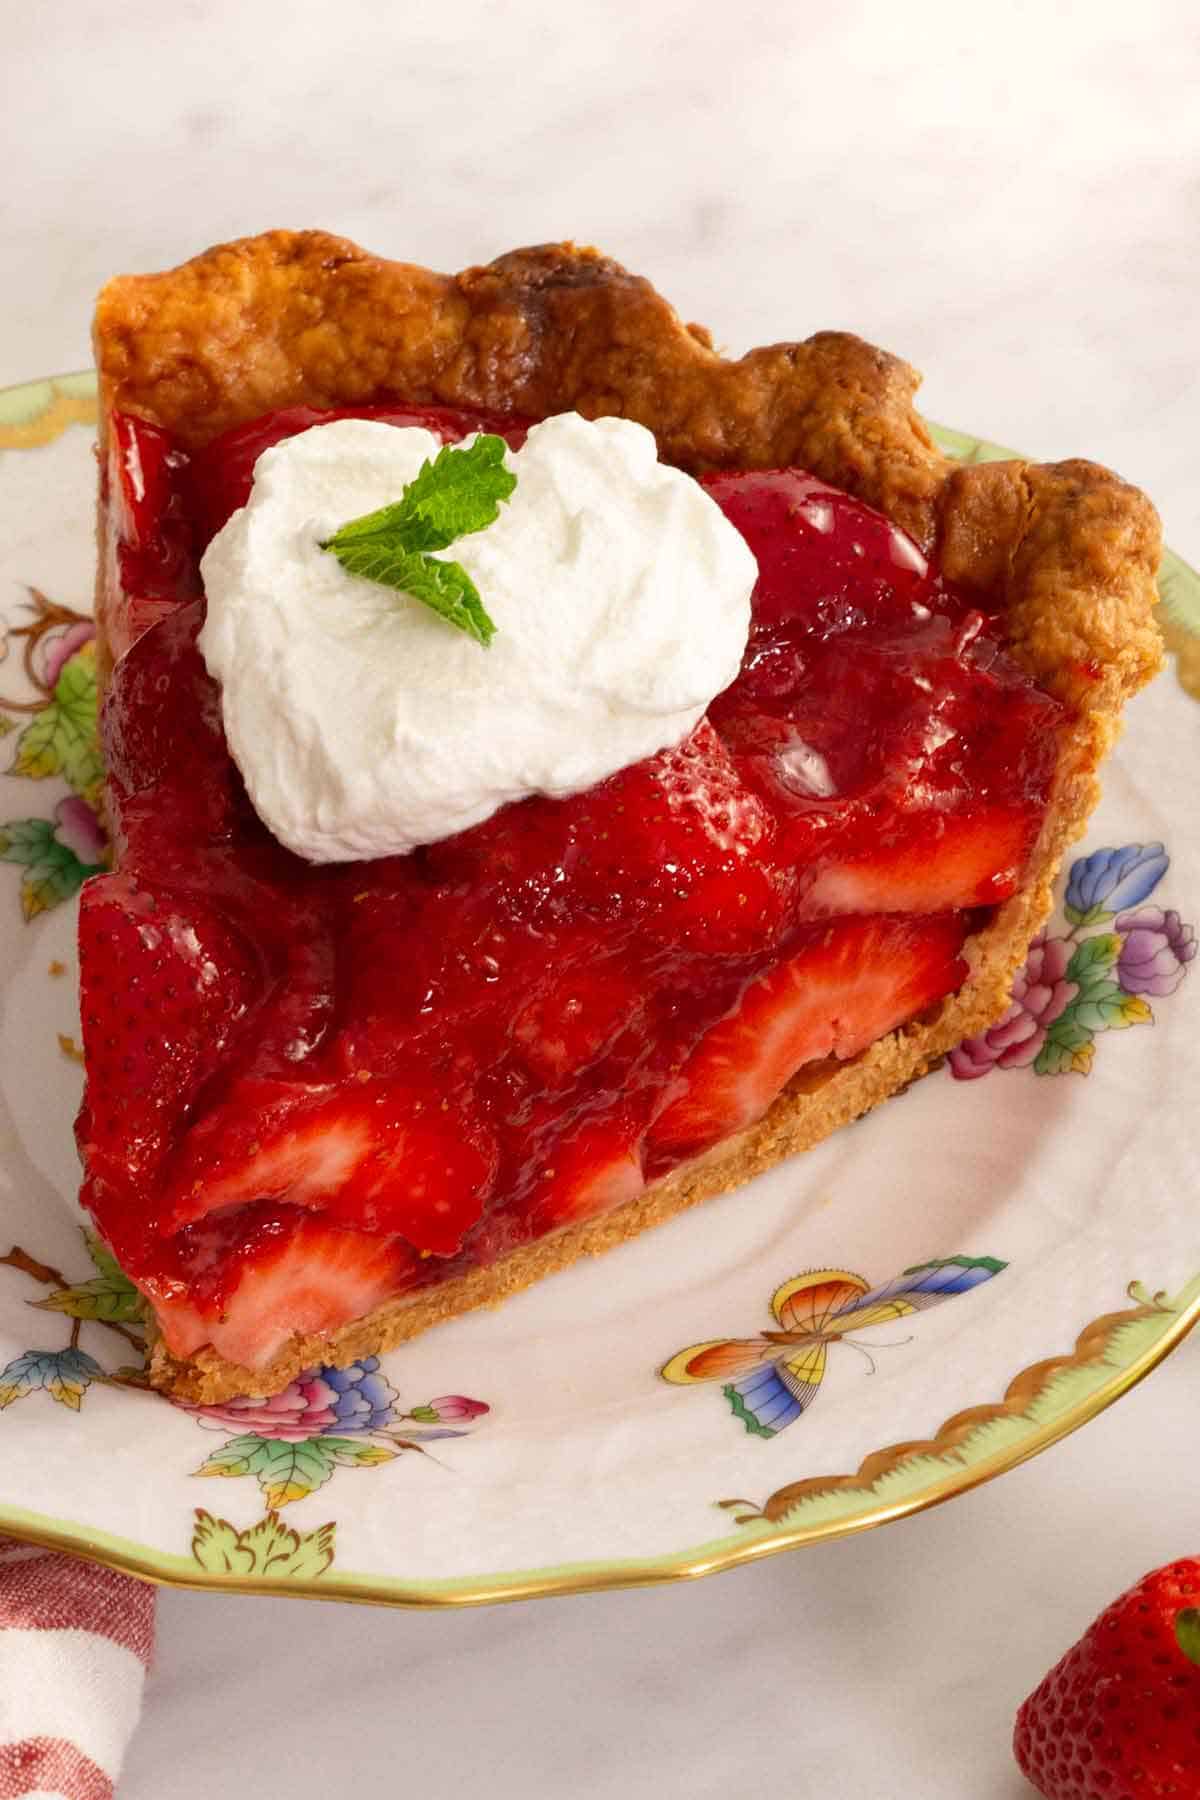 A slice of strawberry pie with whipped cream on top with fresh mint leaves as garnish.